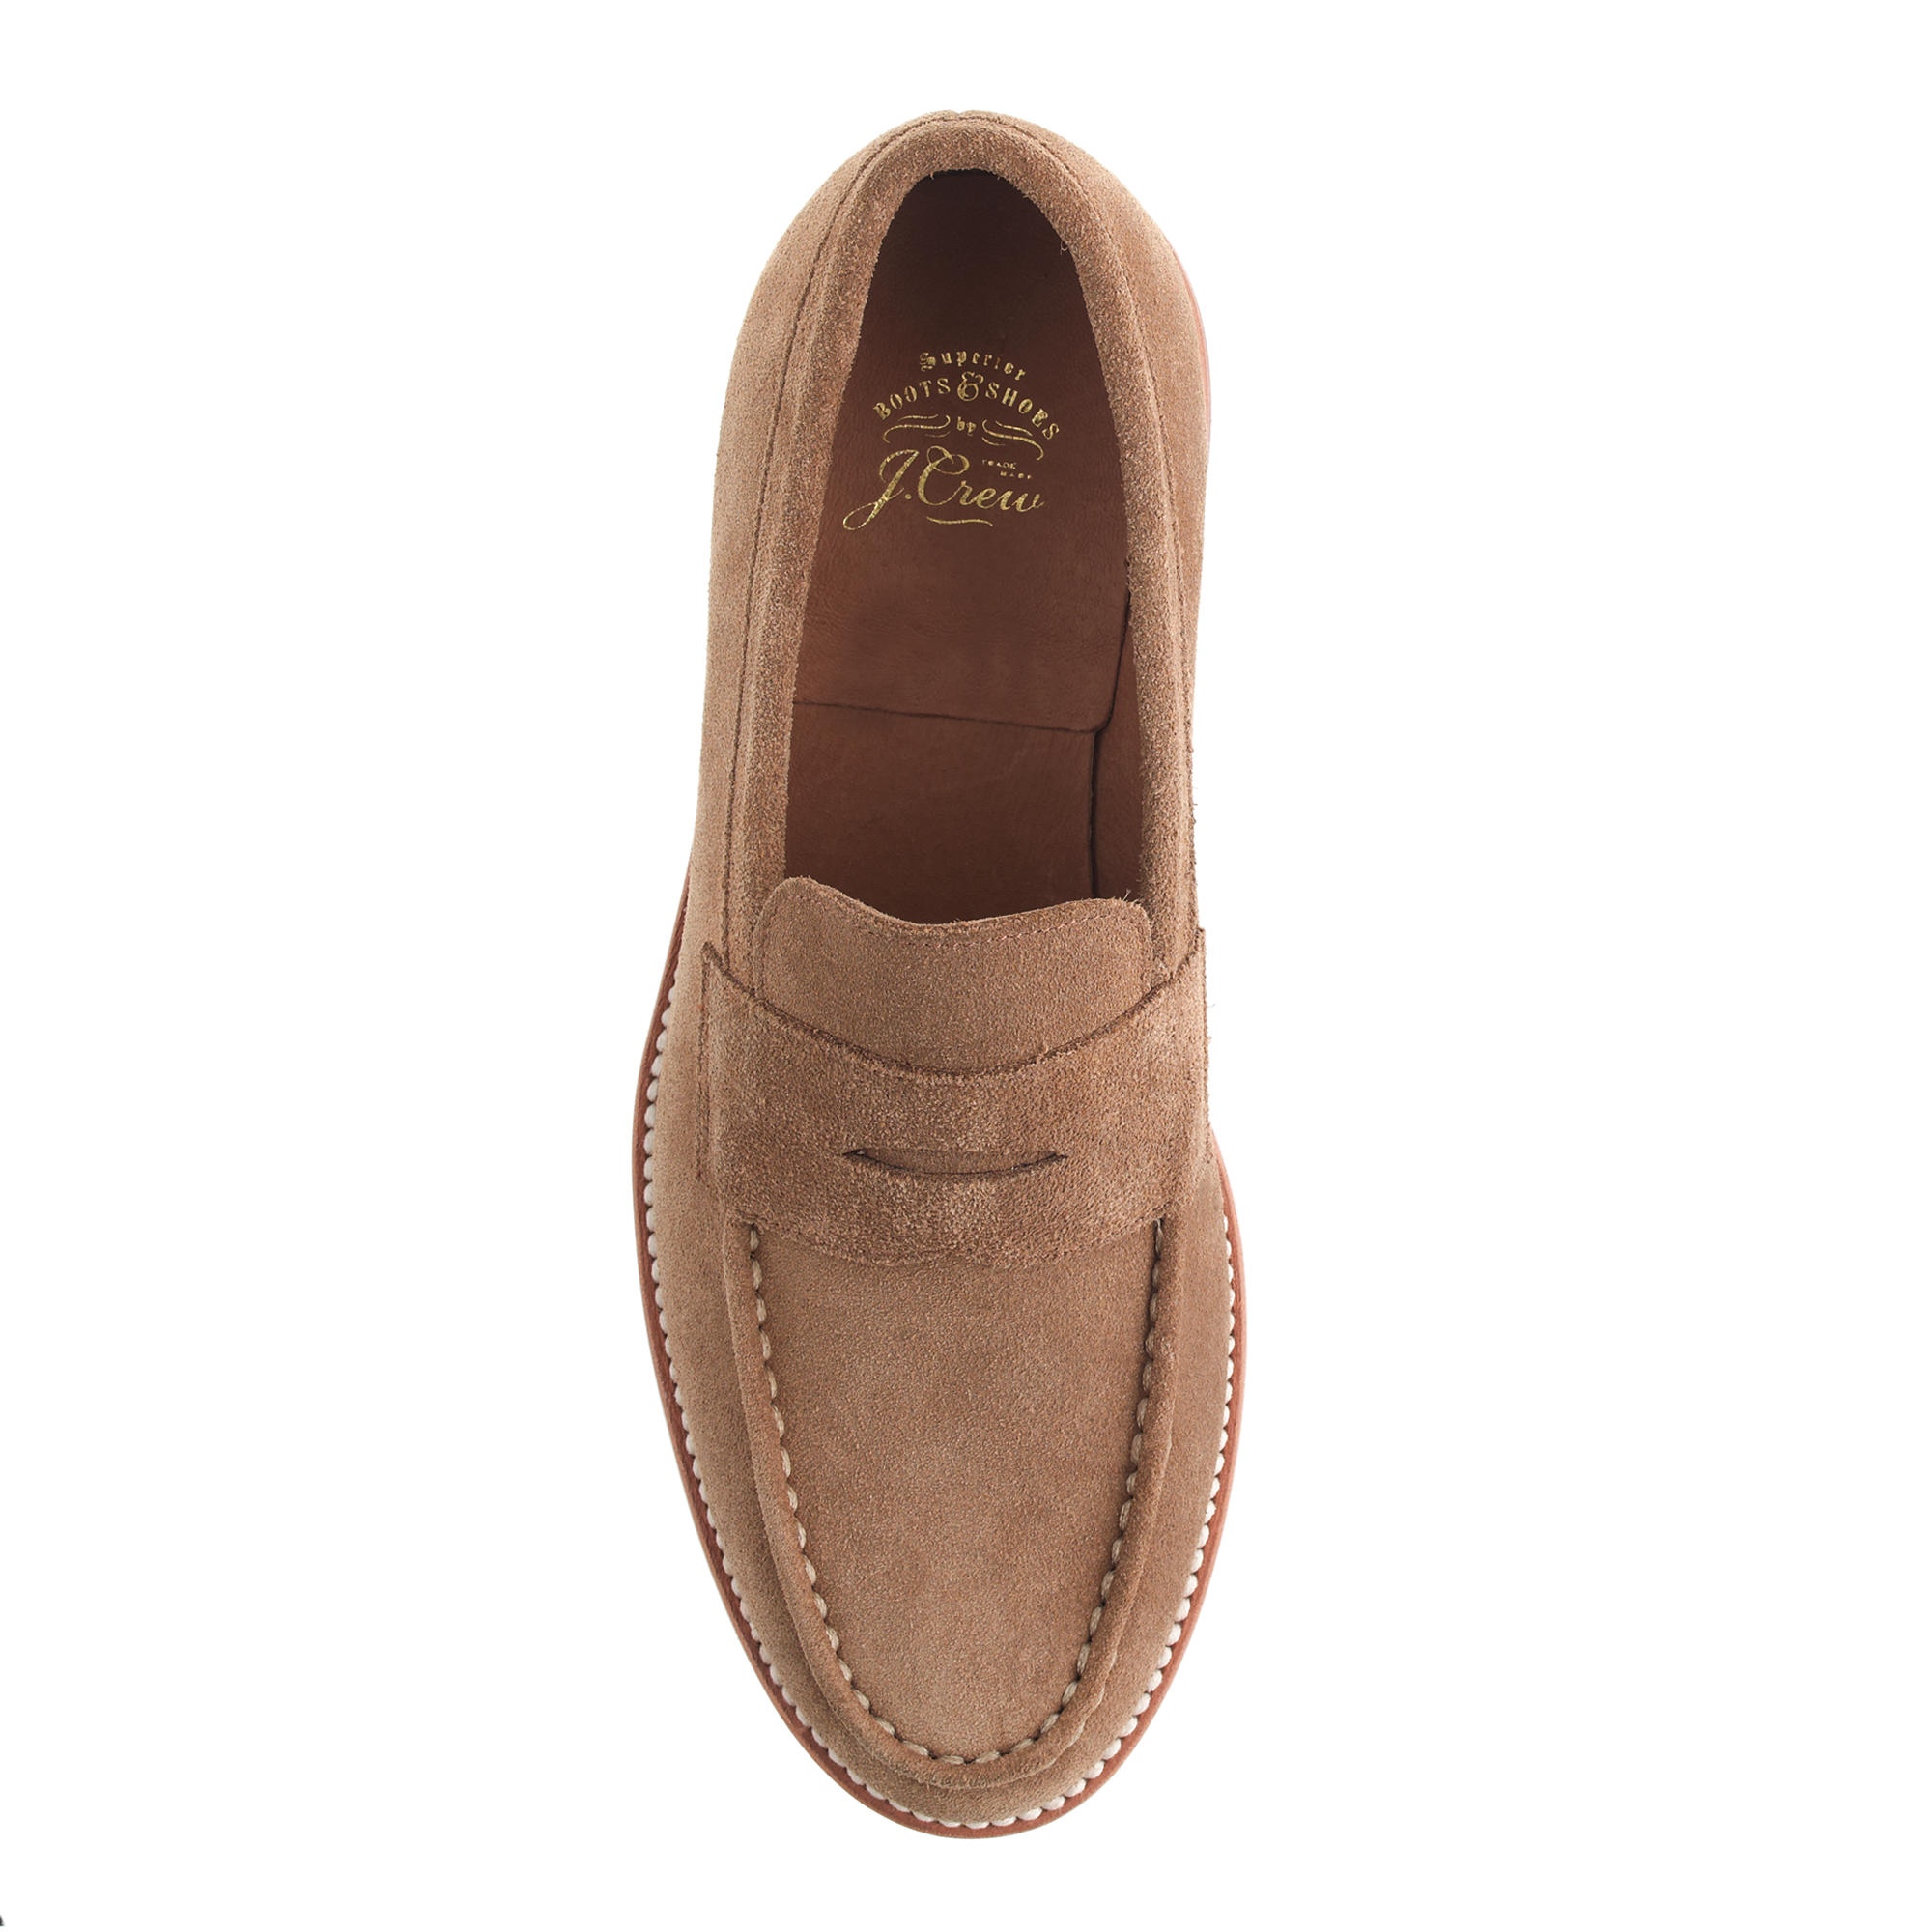 J.crew Kenton Suede Penny Loafers in Brown for Men (sahara) - Save 3%